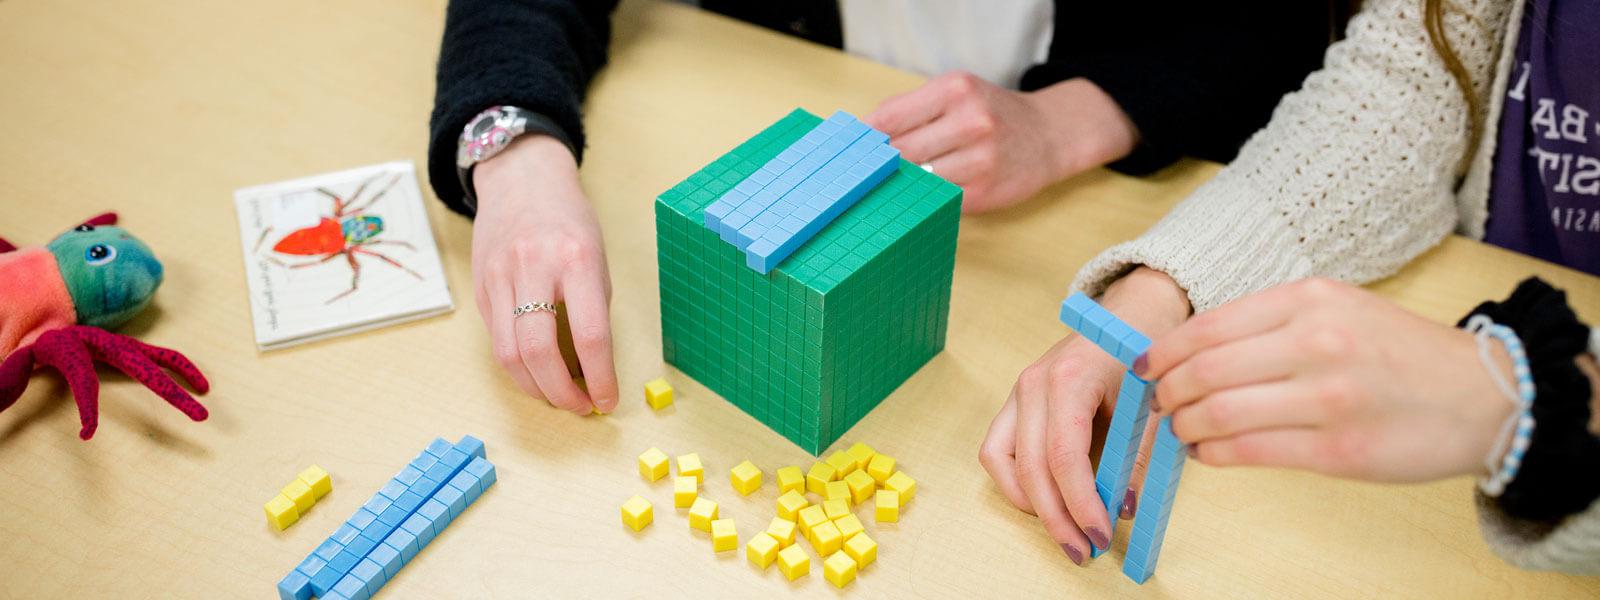 close-up of 学生' hands as they work with math manipulative blocks